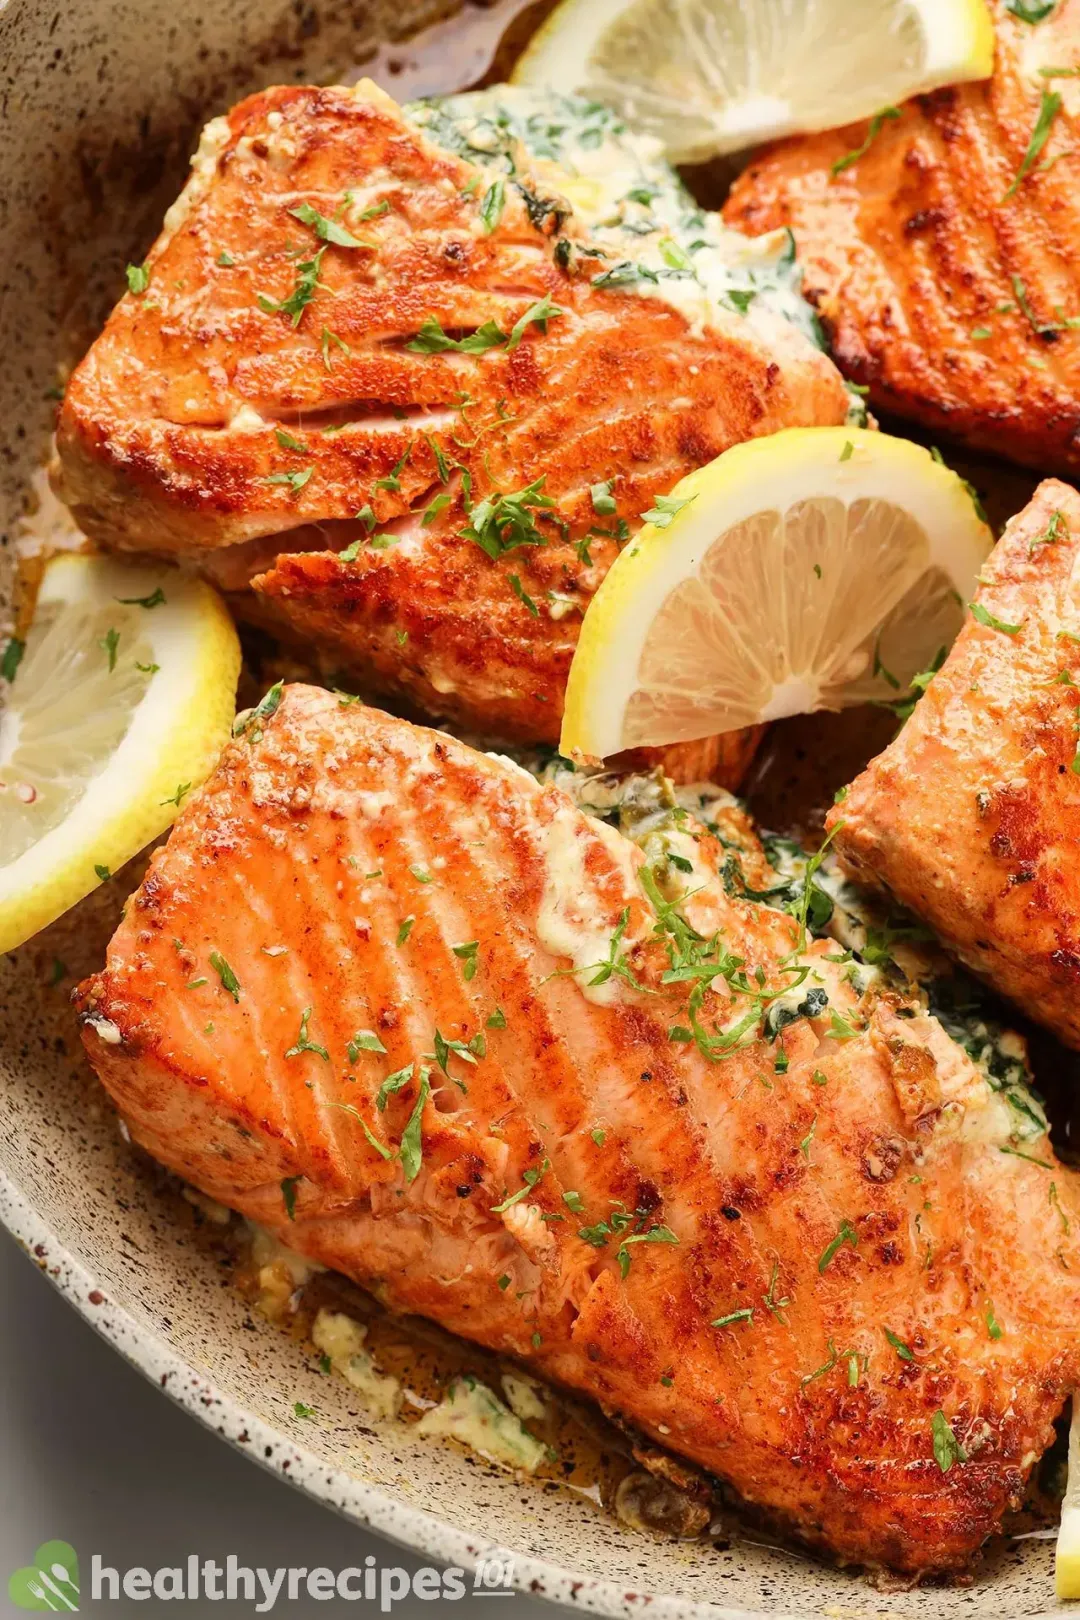 Stuffed Salmon Recipe: Jam-Packed With Goodness